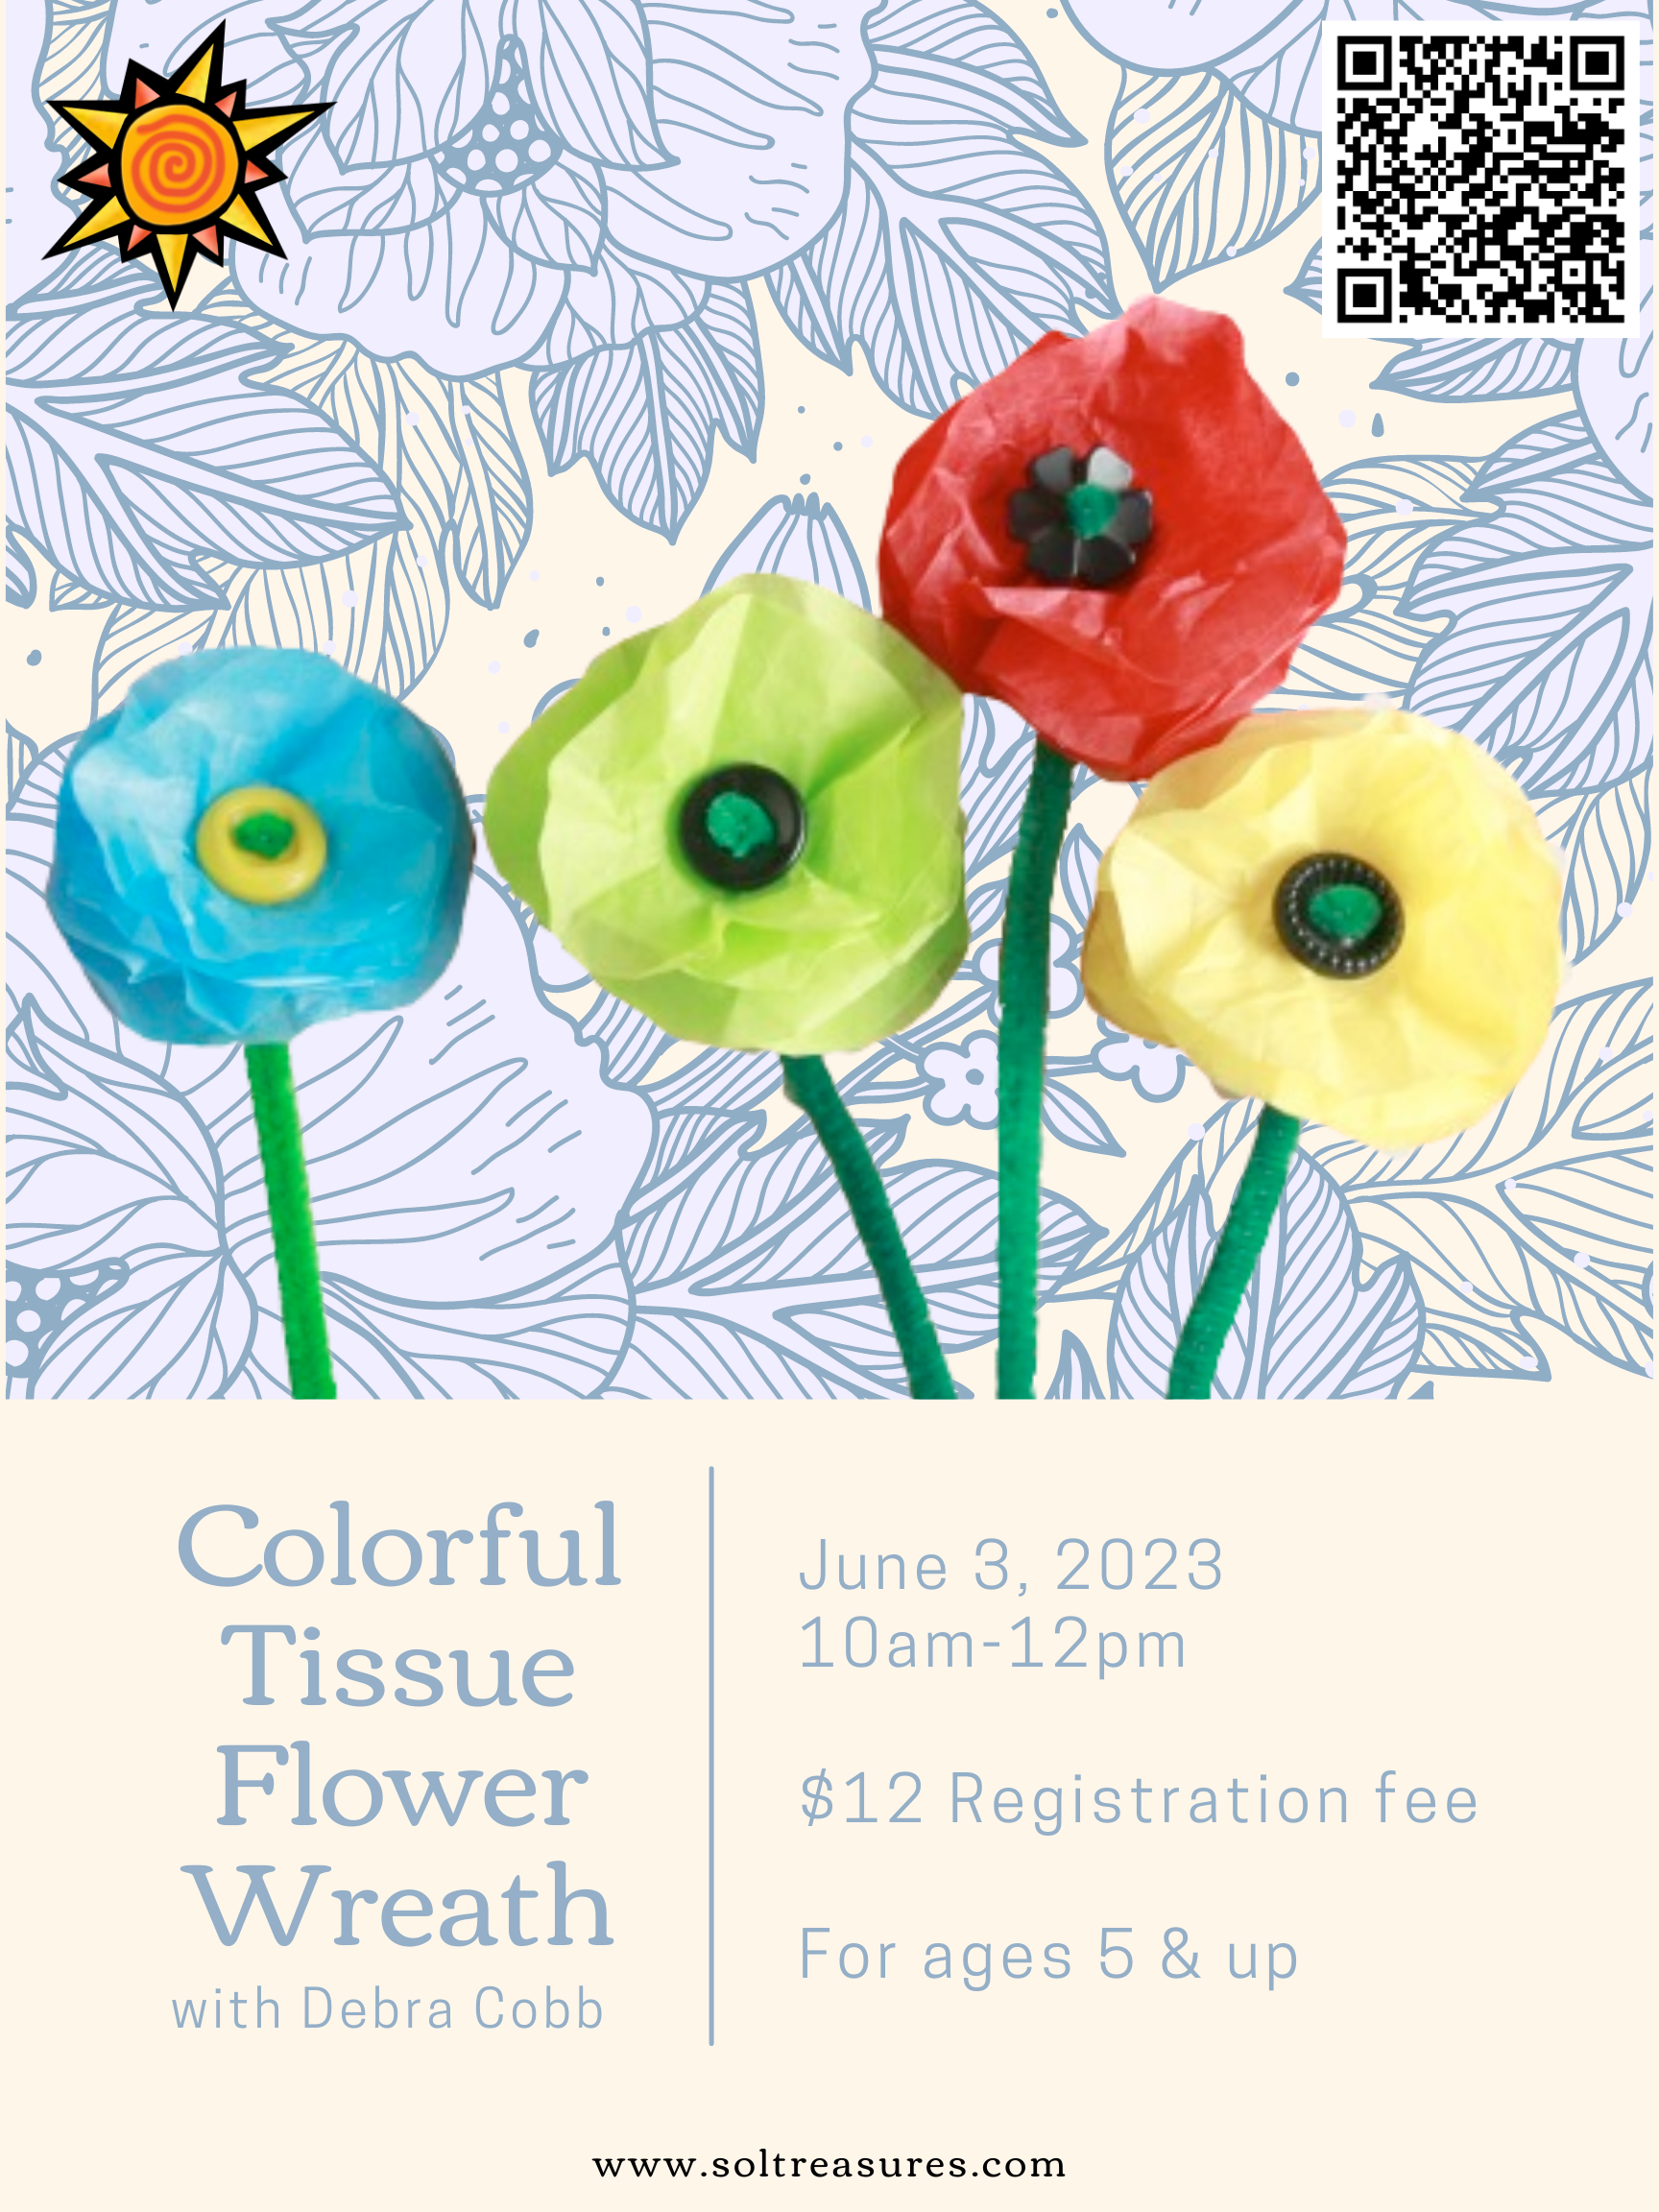 Event flyer: Colorful Tissue Flower Wreath. June 3, 2023 10am-12pm. $12 registration fee for ages 5 and up.